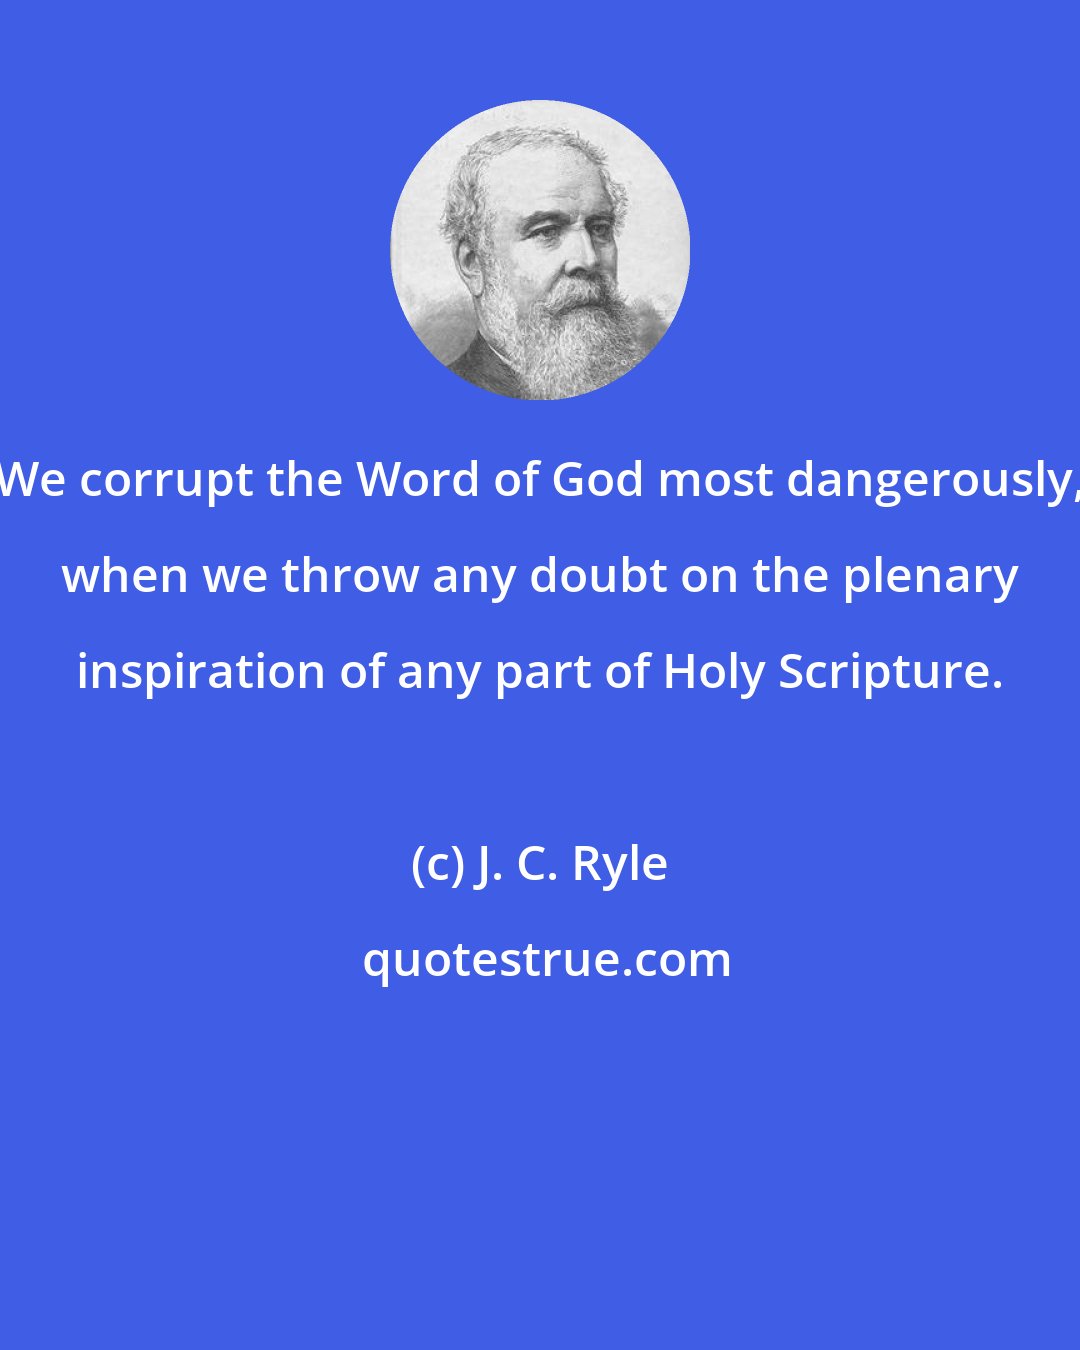 J. C. Ryle: We corrupt the Word of God most dangerously, when we throw any doubt on the plenary inspiration of any part of Holy Scripture.